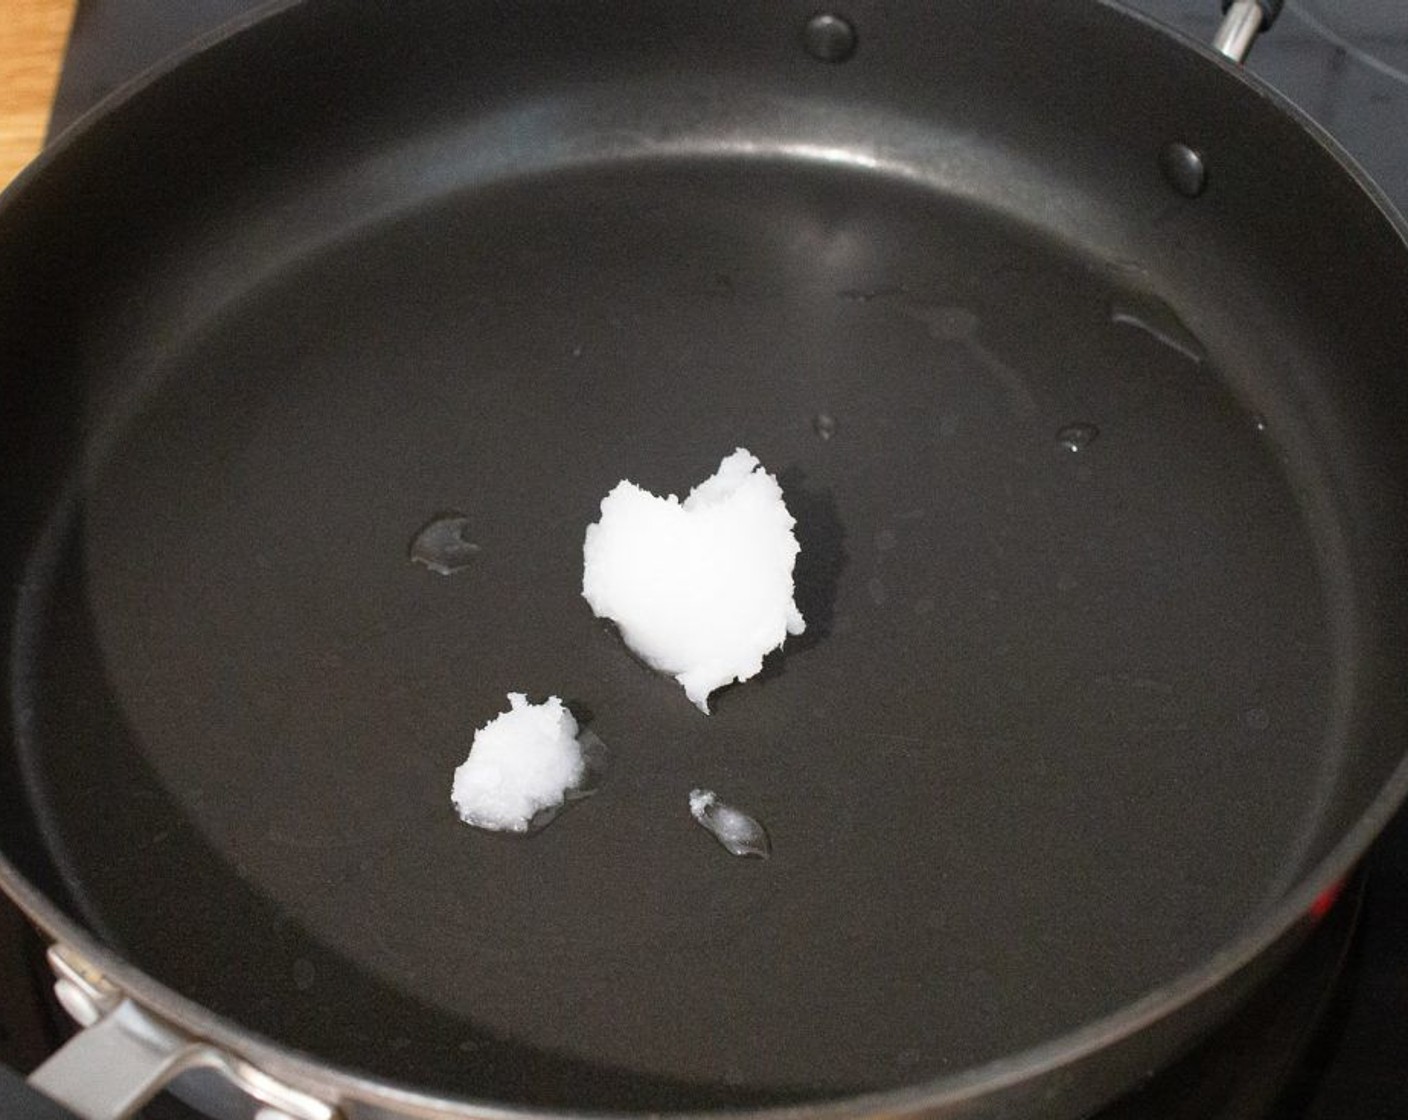 step 2 Heat the Coconut Oil (1 Tbsp) in a large, non-stick frying pan over medium heat until it has melted.